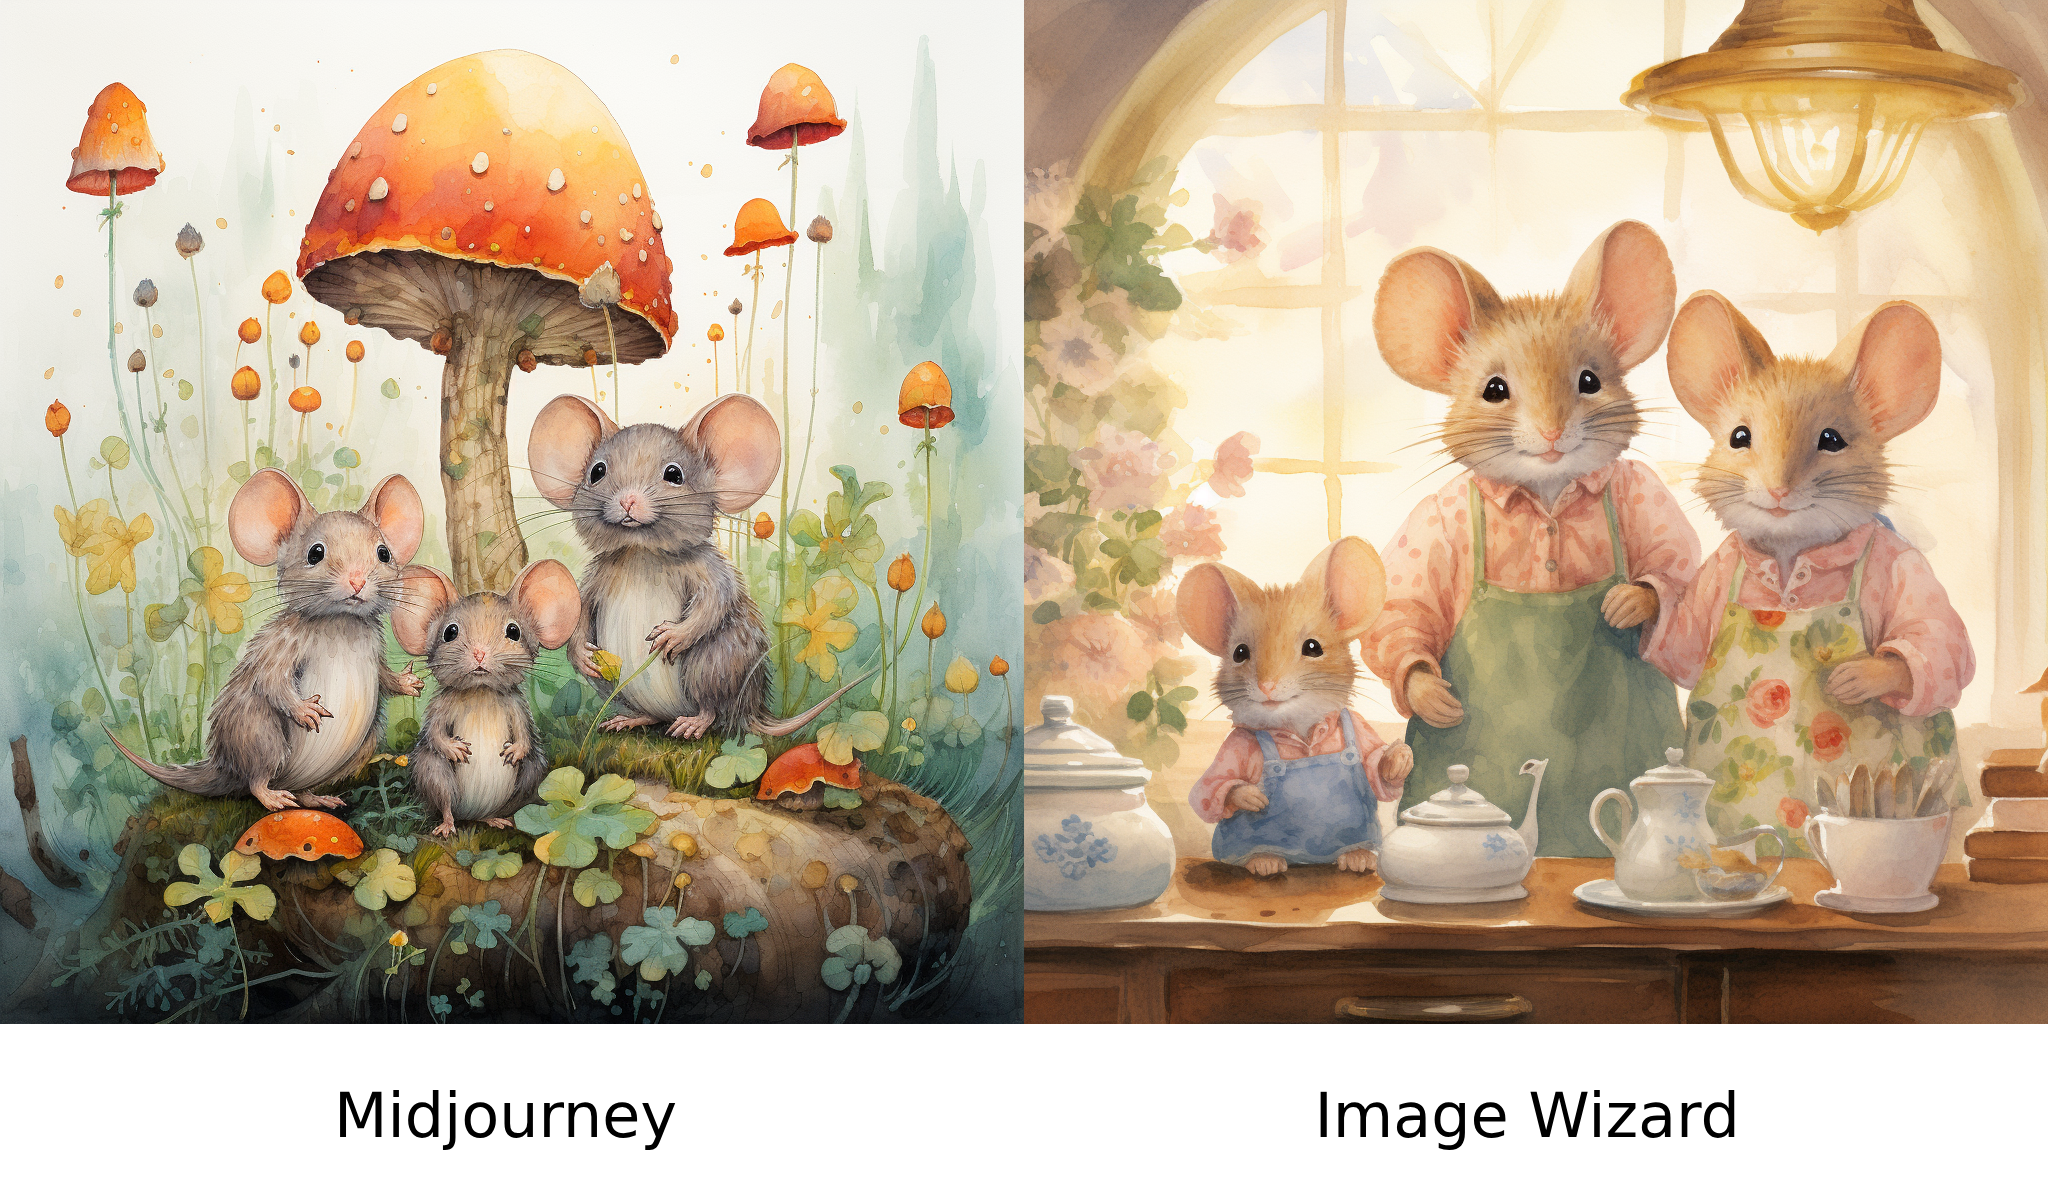 Showcase of Image Wizard results